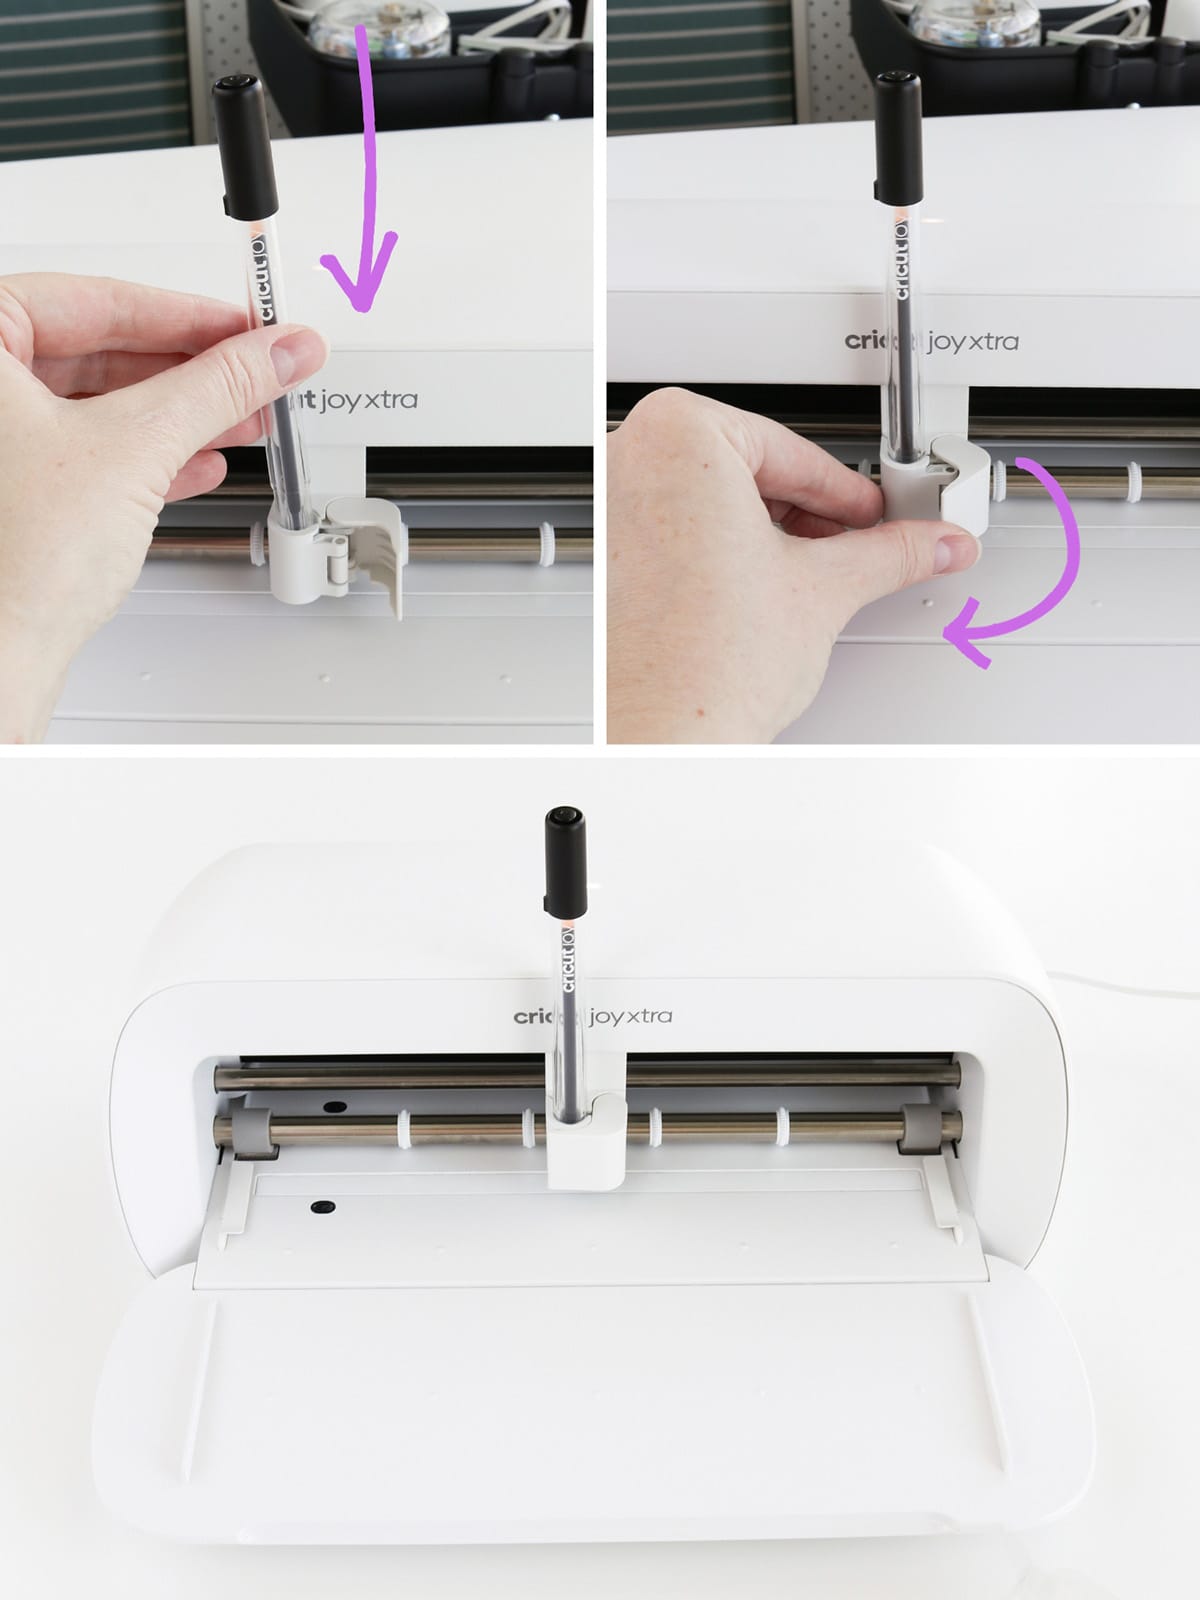 how to install pens and markers in the Cricut Joy Xtra machine